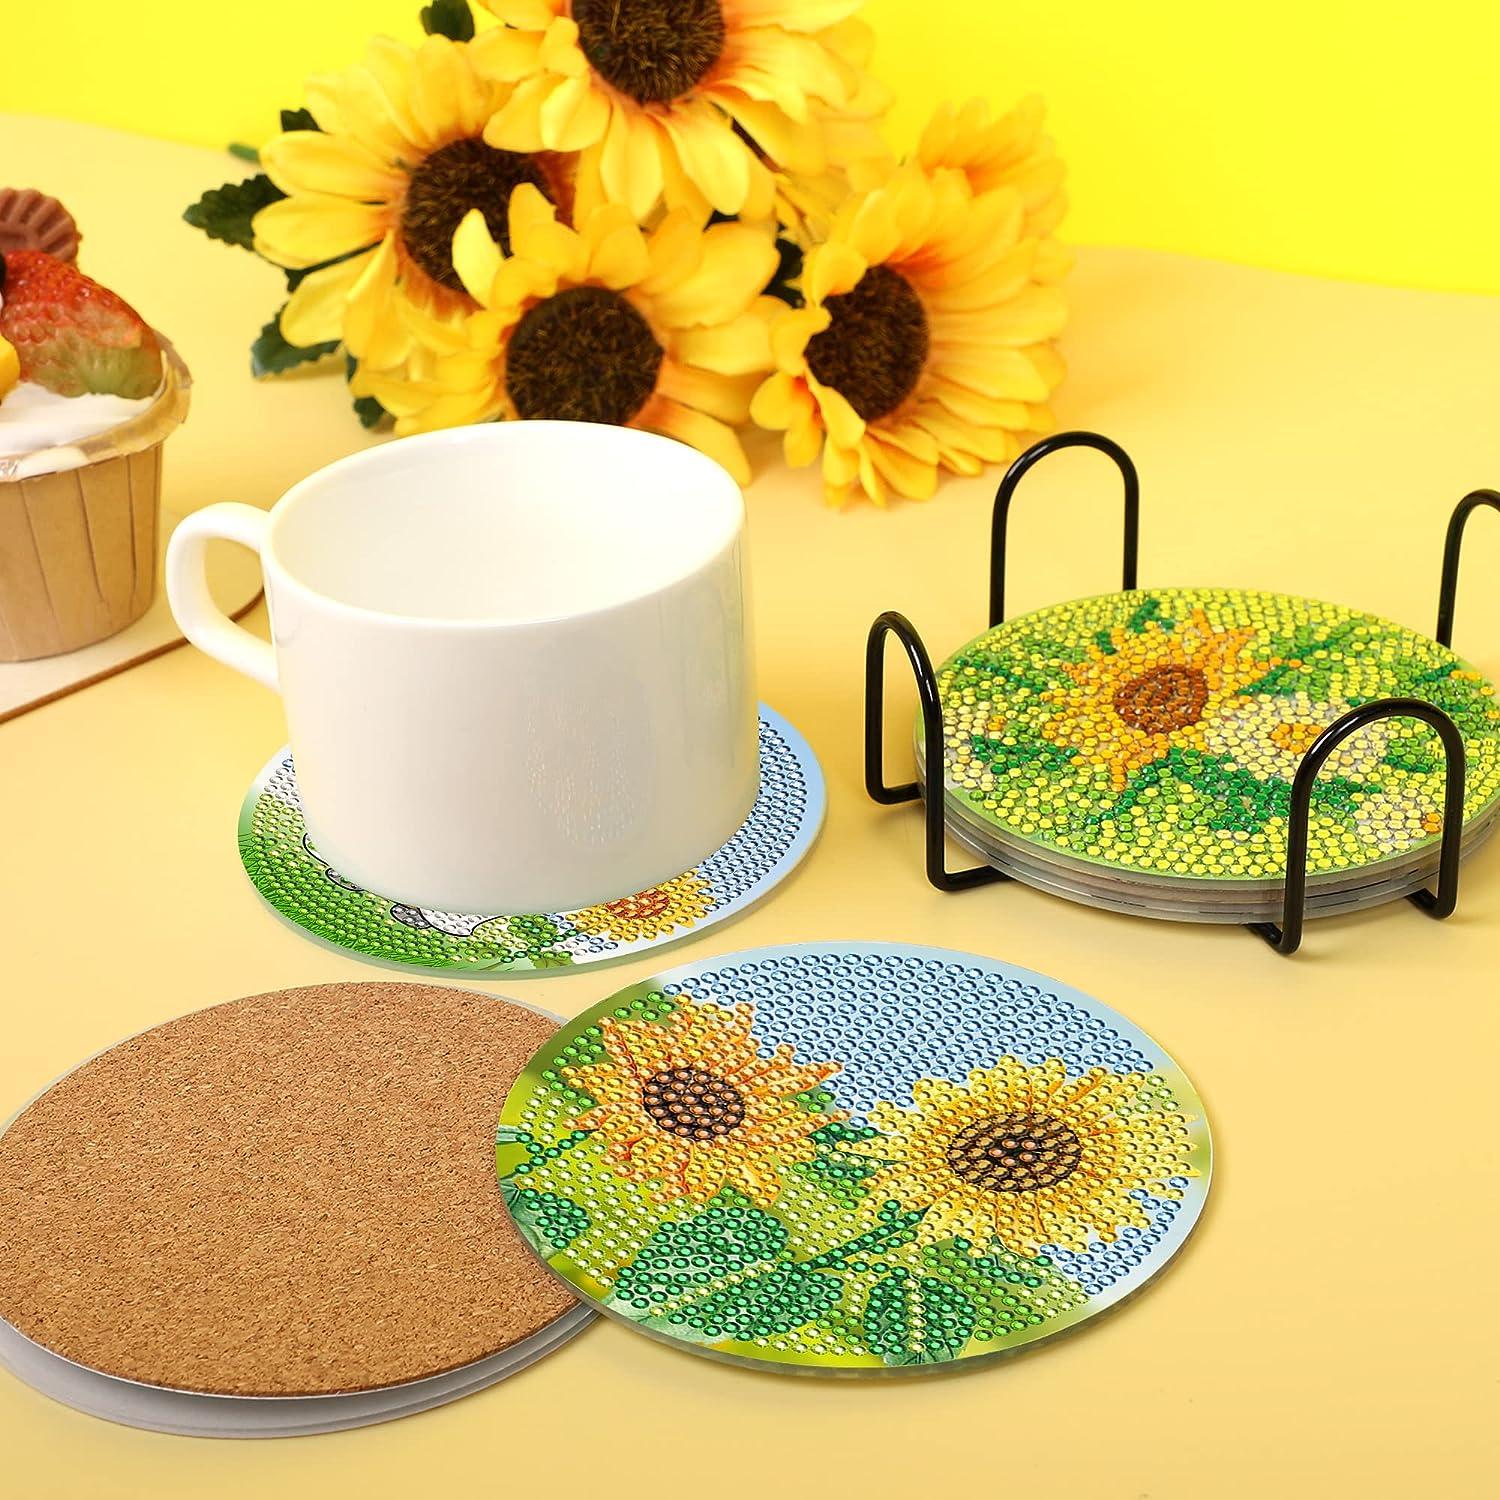 8 Pcs Diamond Painting Coasters with Holder DIY 5D Diamond Painting Kits  Diamond Art Coasters Shining Drink Coasters DIY Arts and Crafts for Adults